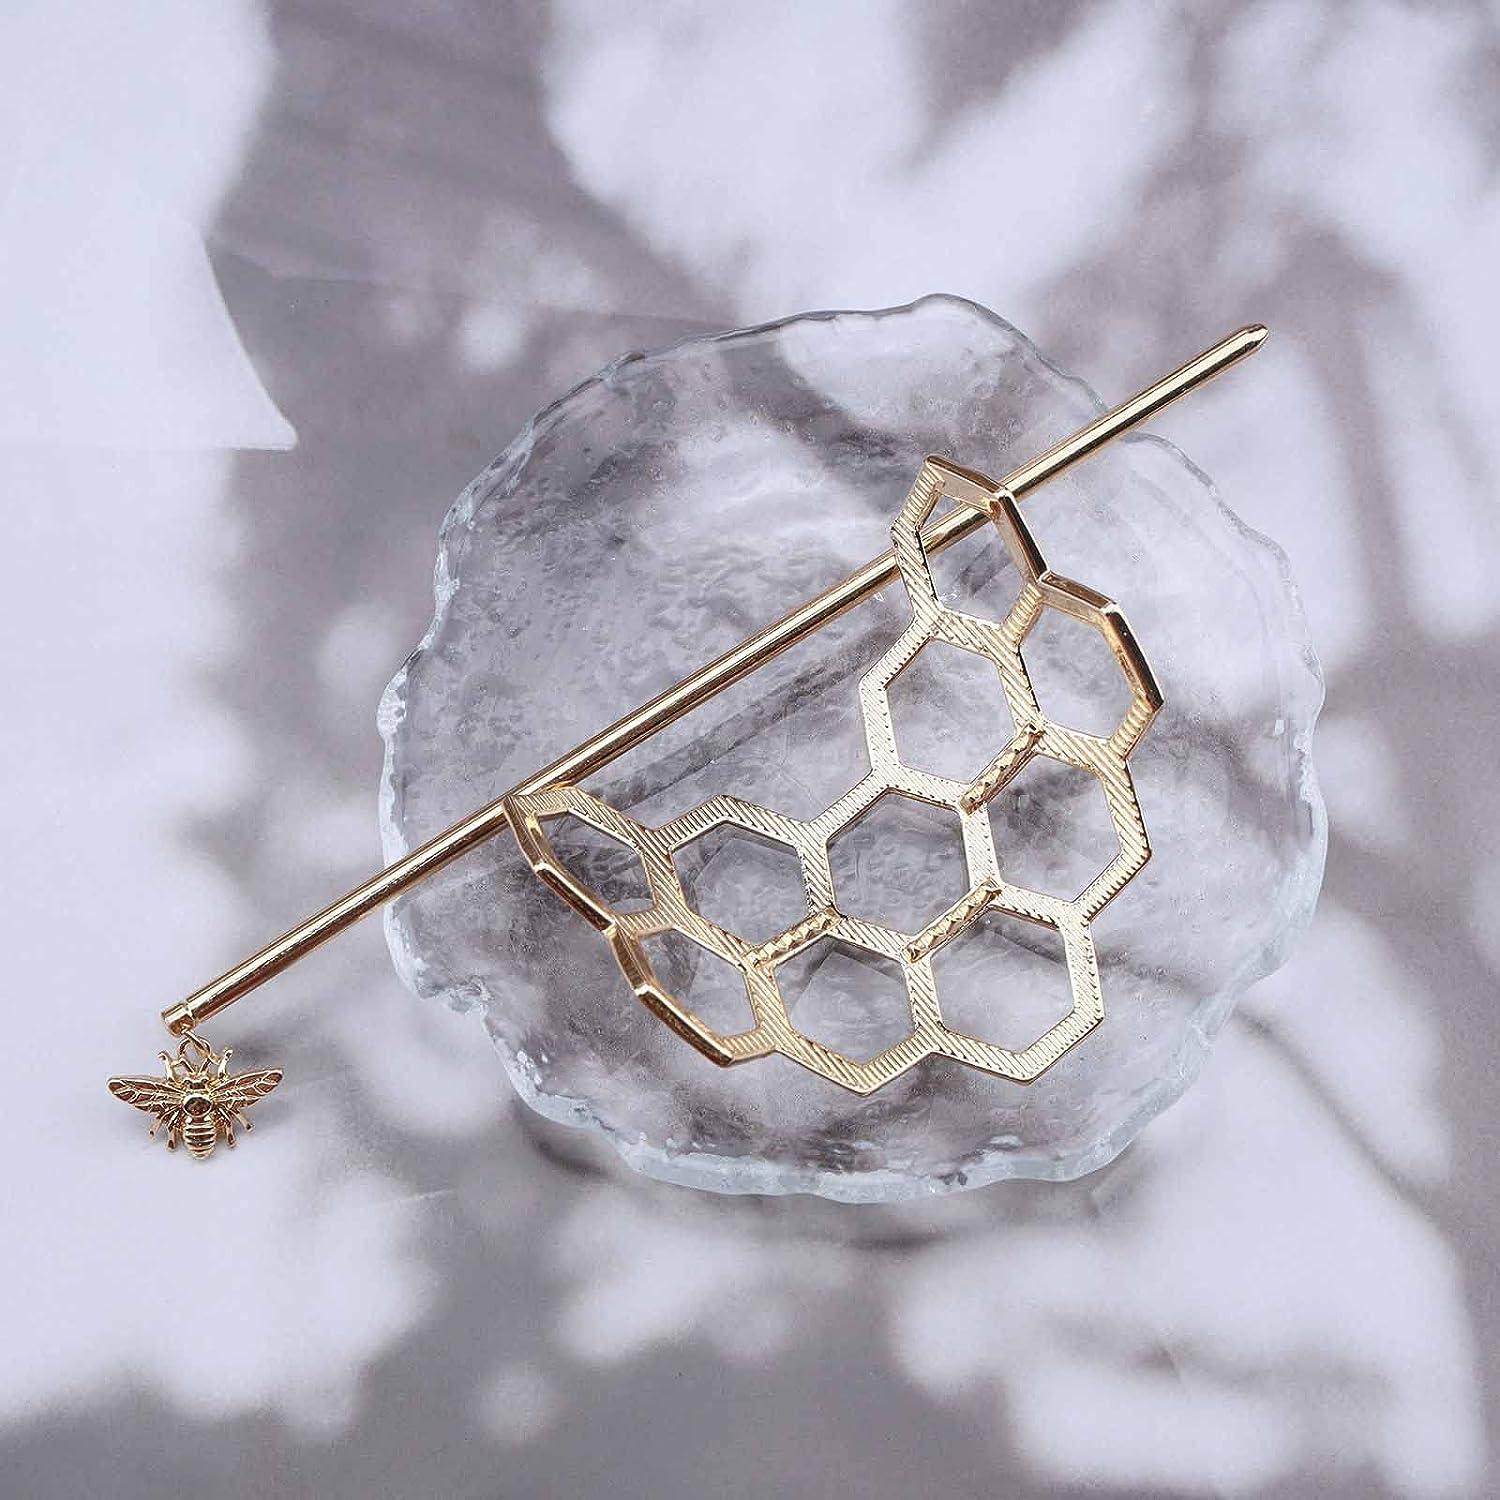 4 Pieces Bee Accessories 2 Pieces Hollow Geometric Bee Honeycomb Hair Clips  and 2 Pieces Bee Hair Pin Clips Dainty Alloy Metal Bee Hair Twist Bun Hair